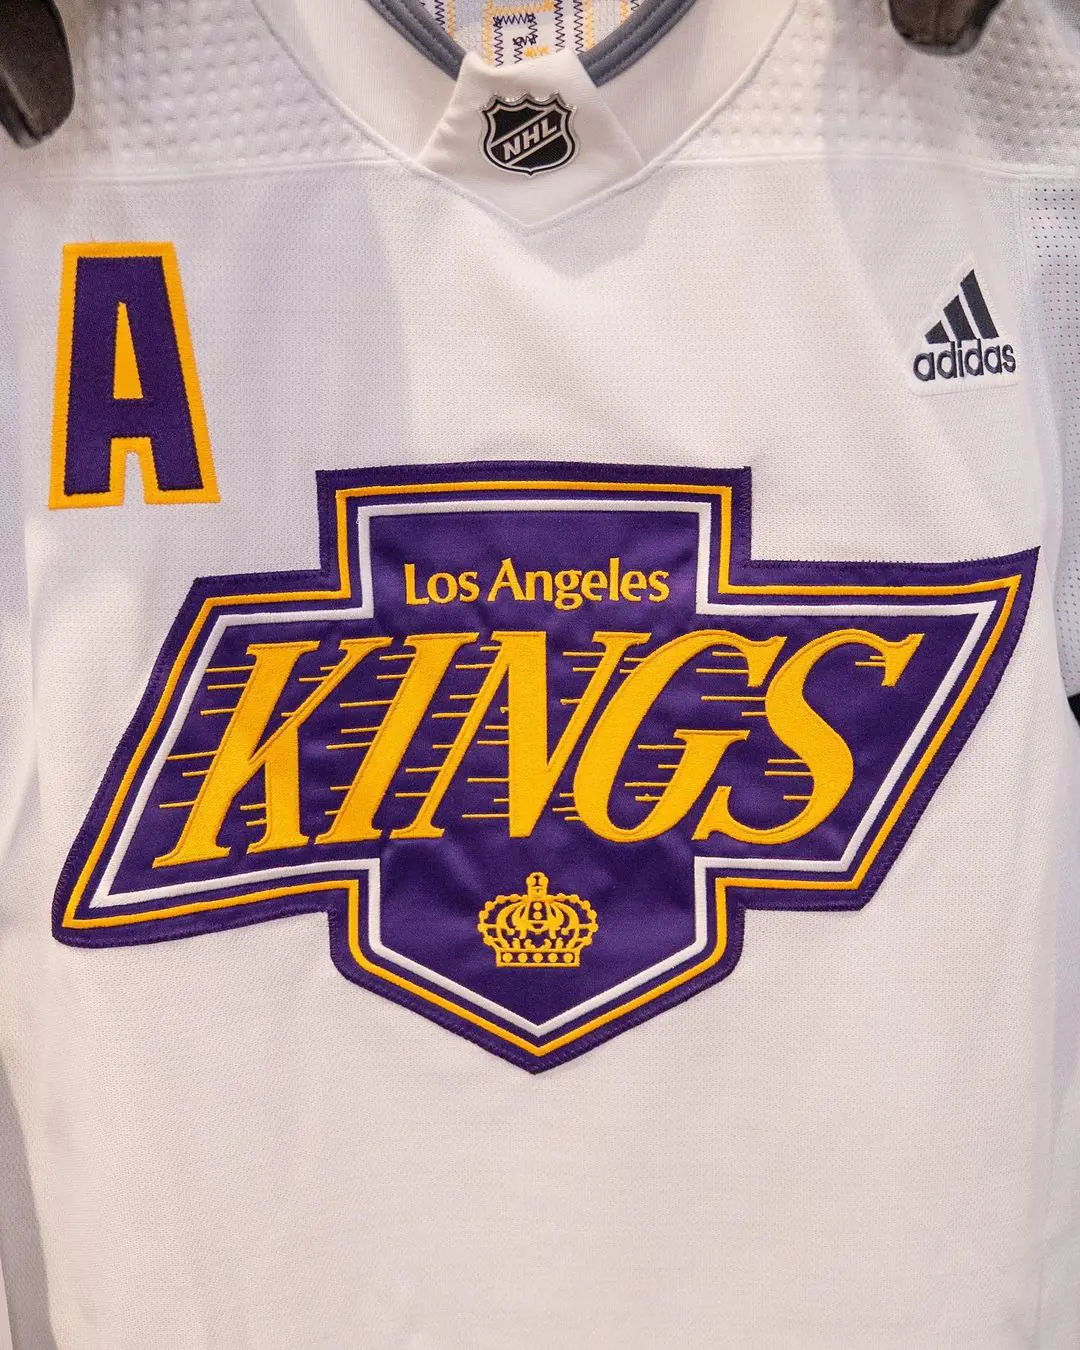 LA Kings came up with their merch after partnering with the UNDEFEATED.